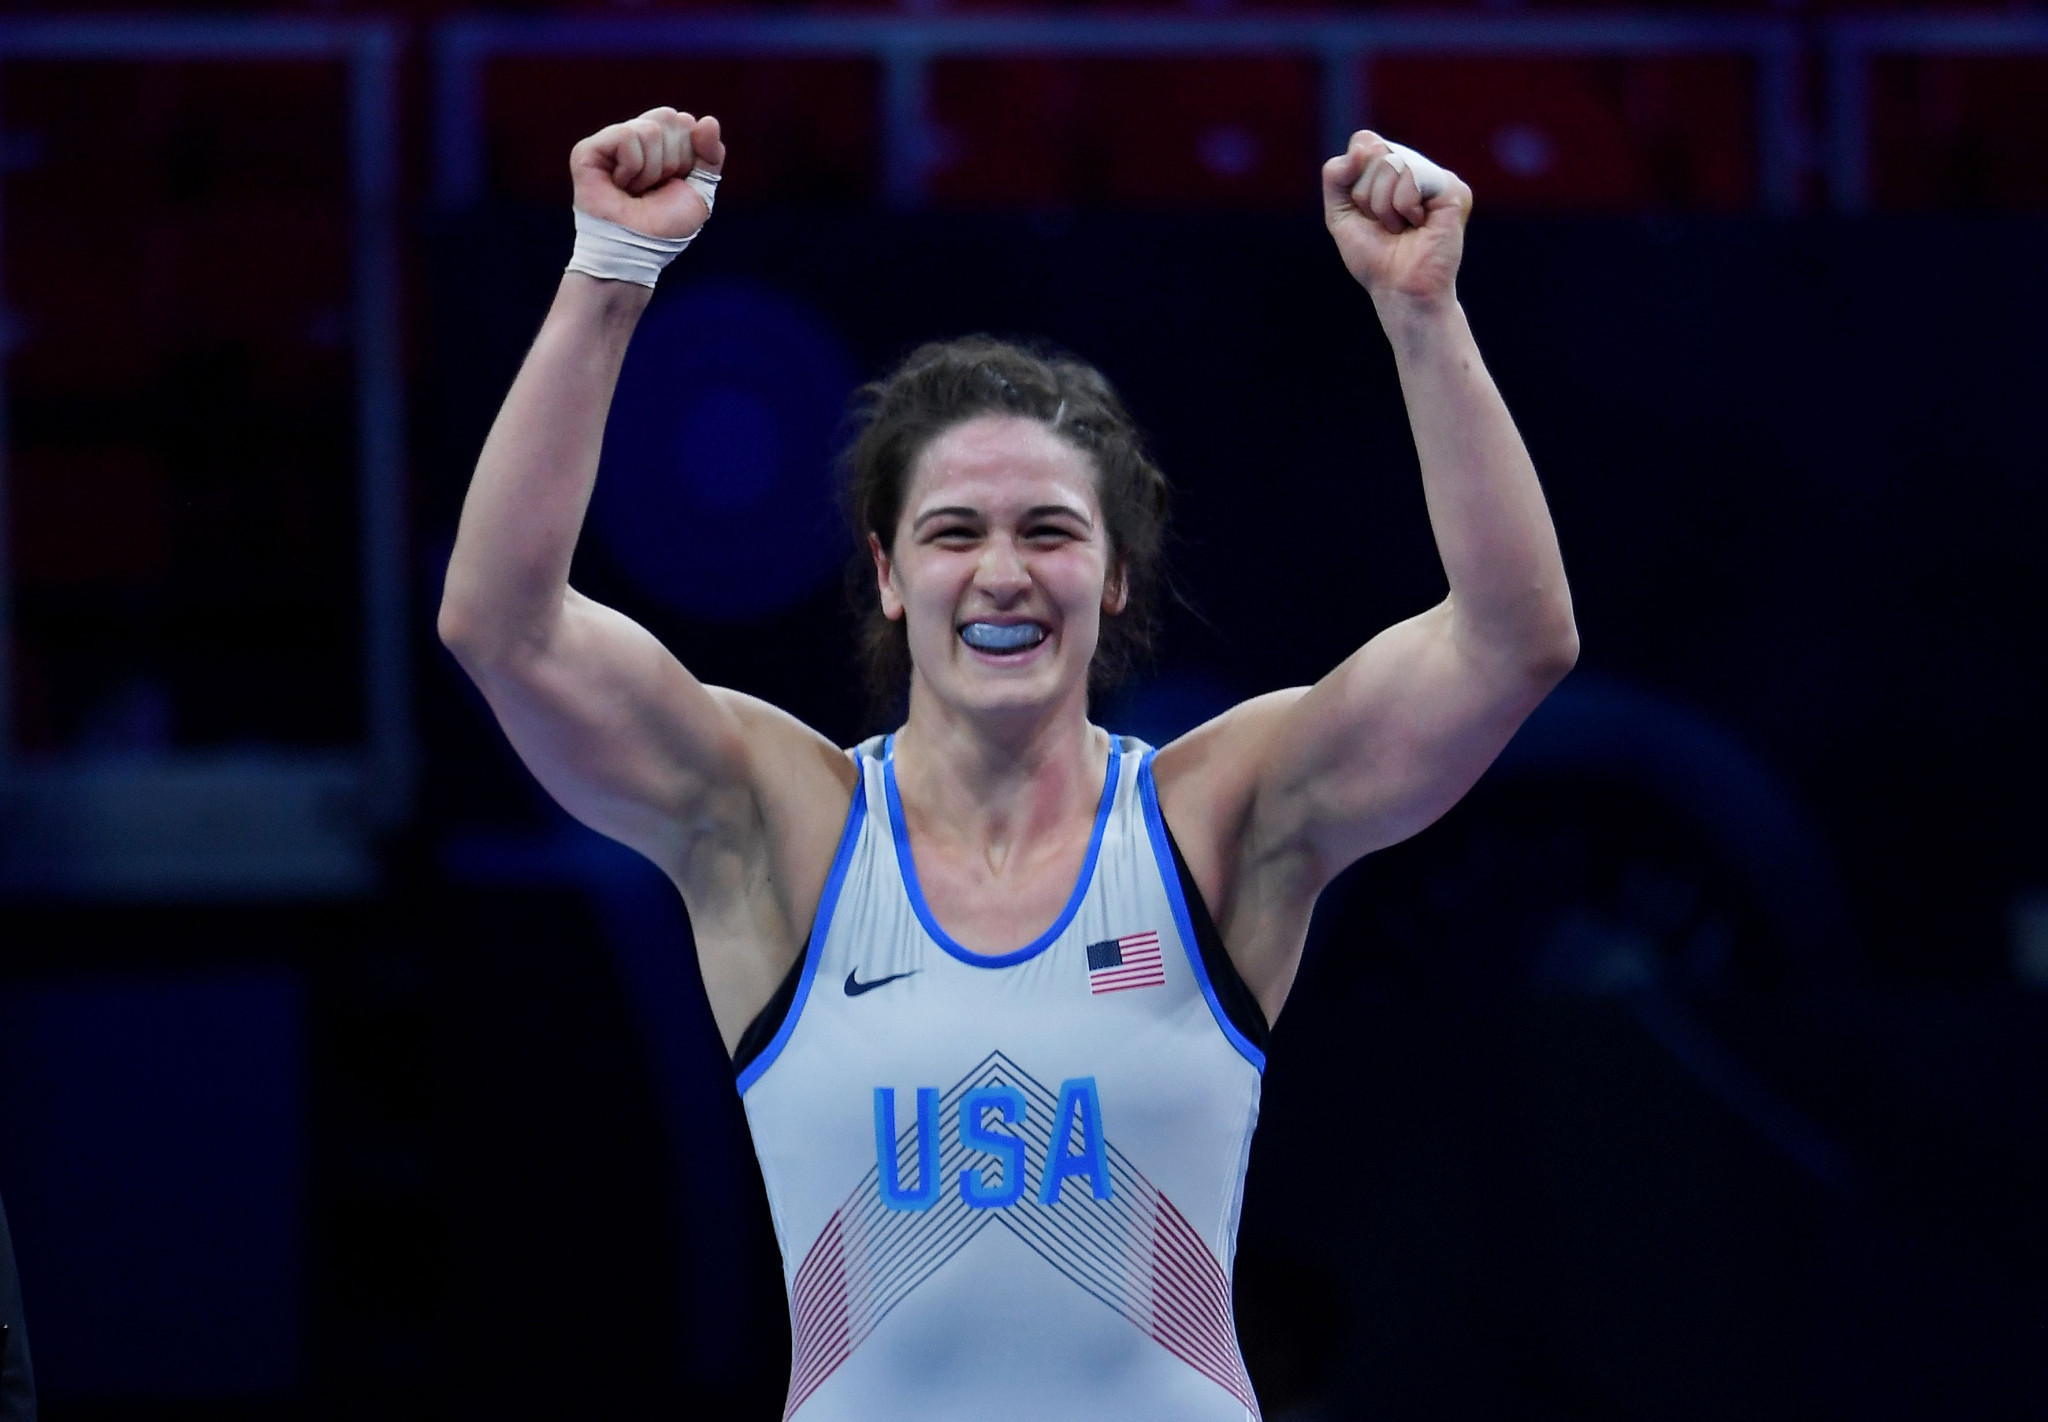 World champion Gray prevails at Pan American Wrestling Championships